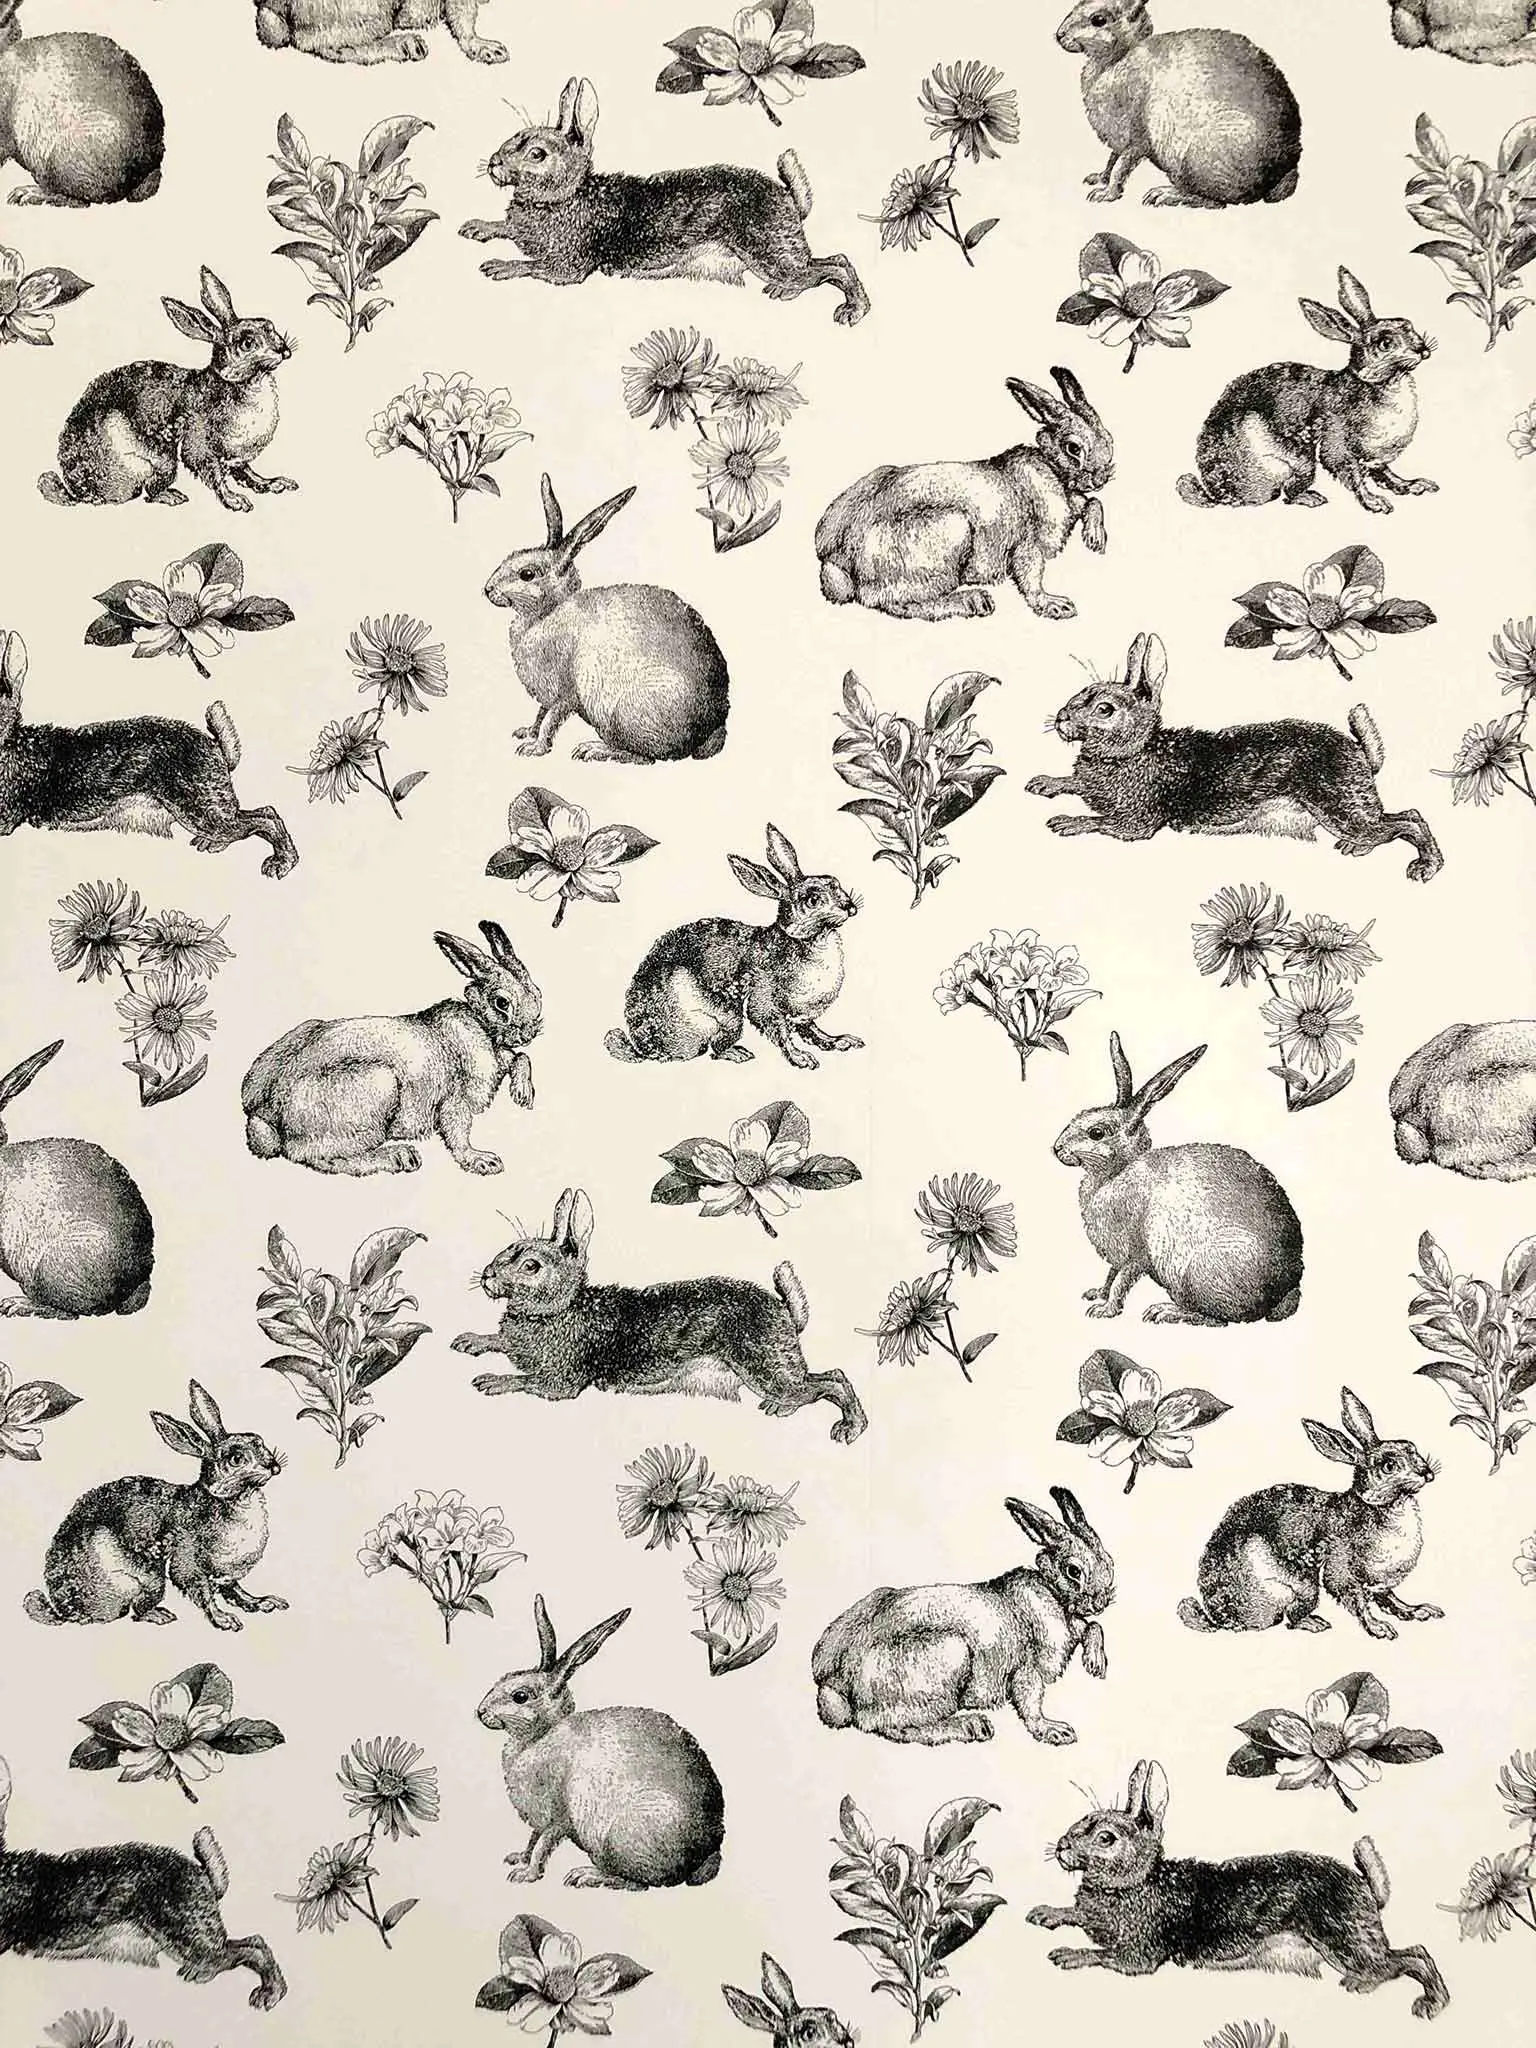 Toile lapin wallpaper - Guest Participant of the One Room Challenge - That Homebird Life Blog